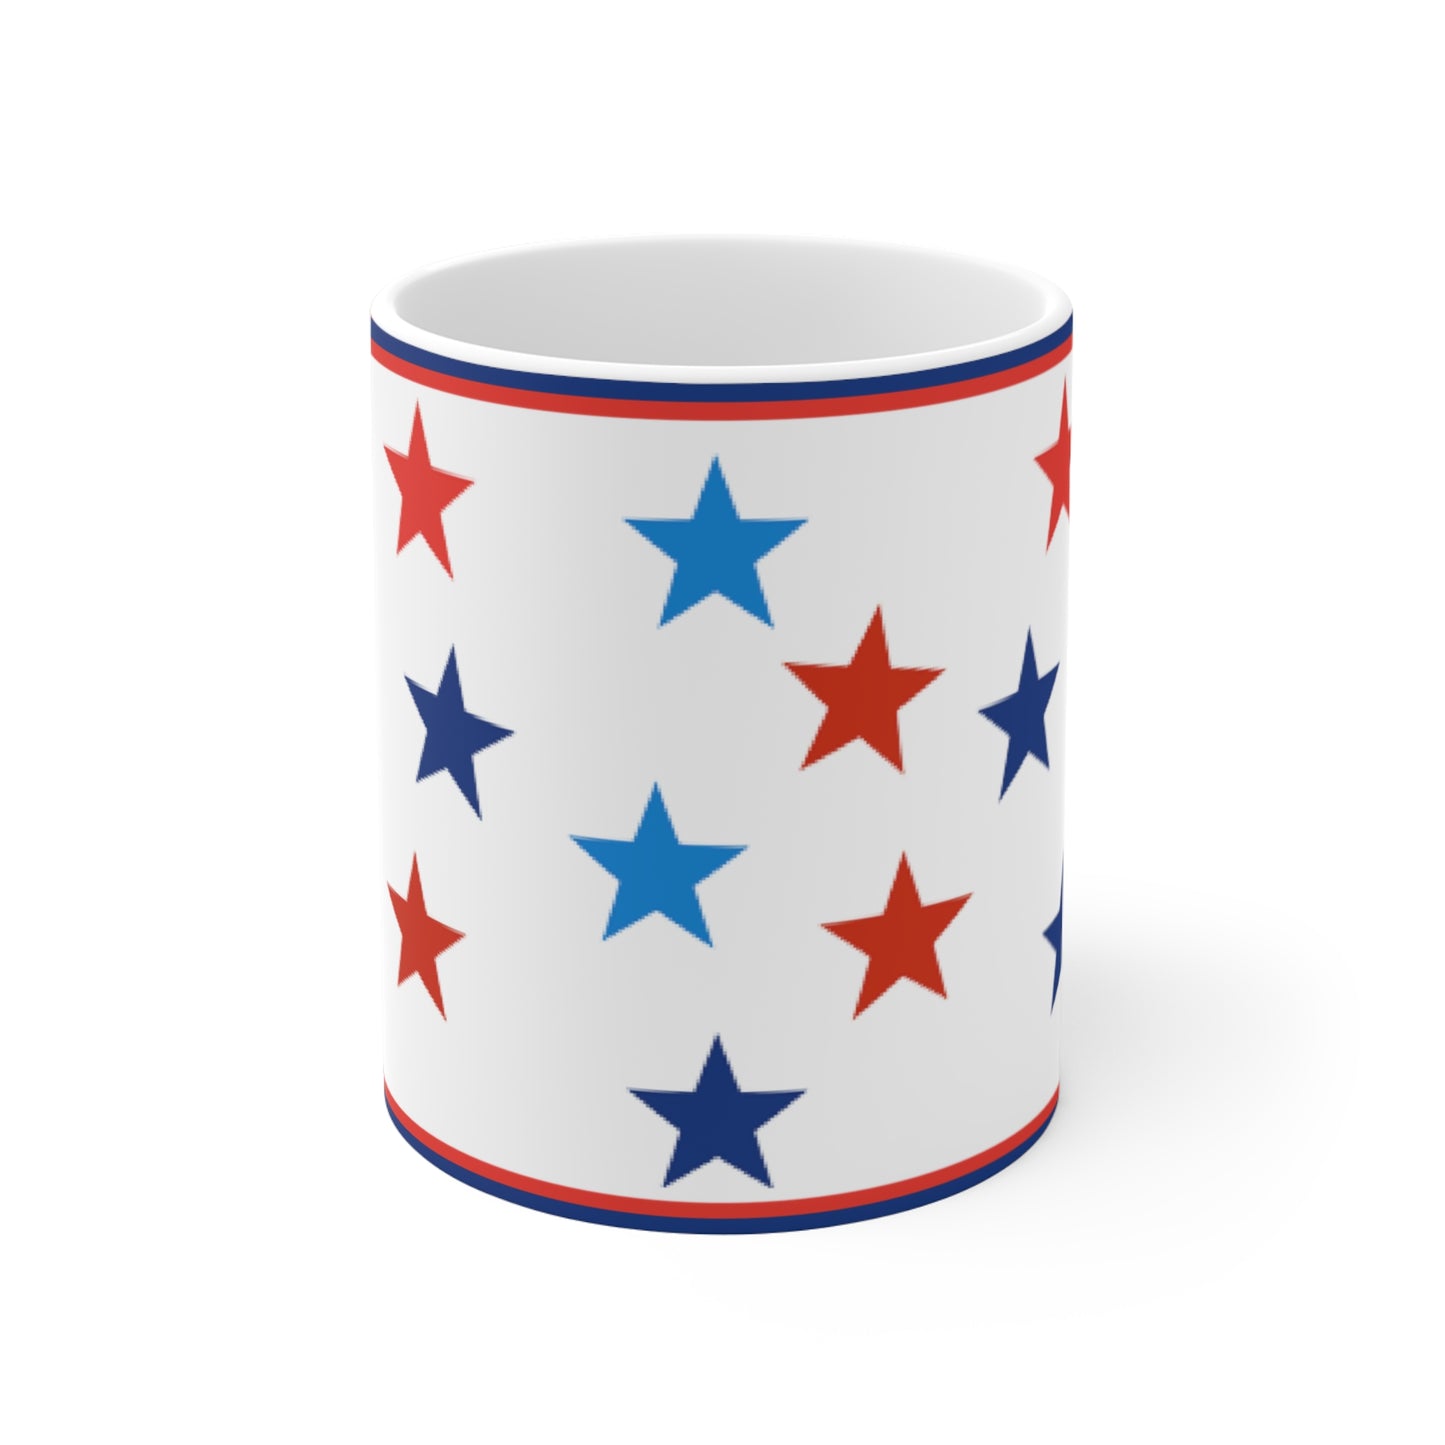 This Mug with Stars: Blue and Red on White; Ceramic; 11 oz., designed by Pam Ponsart, is decorated with red, blue, and light blue stars and features bold red and blue striped borders at the top and bottom.